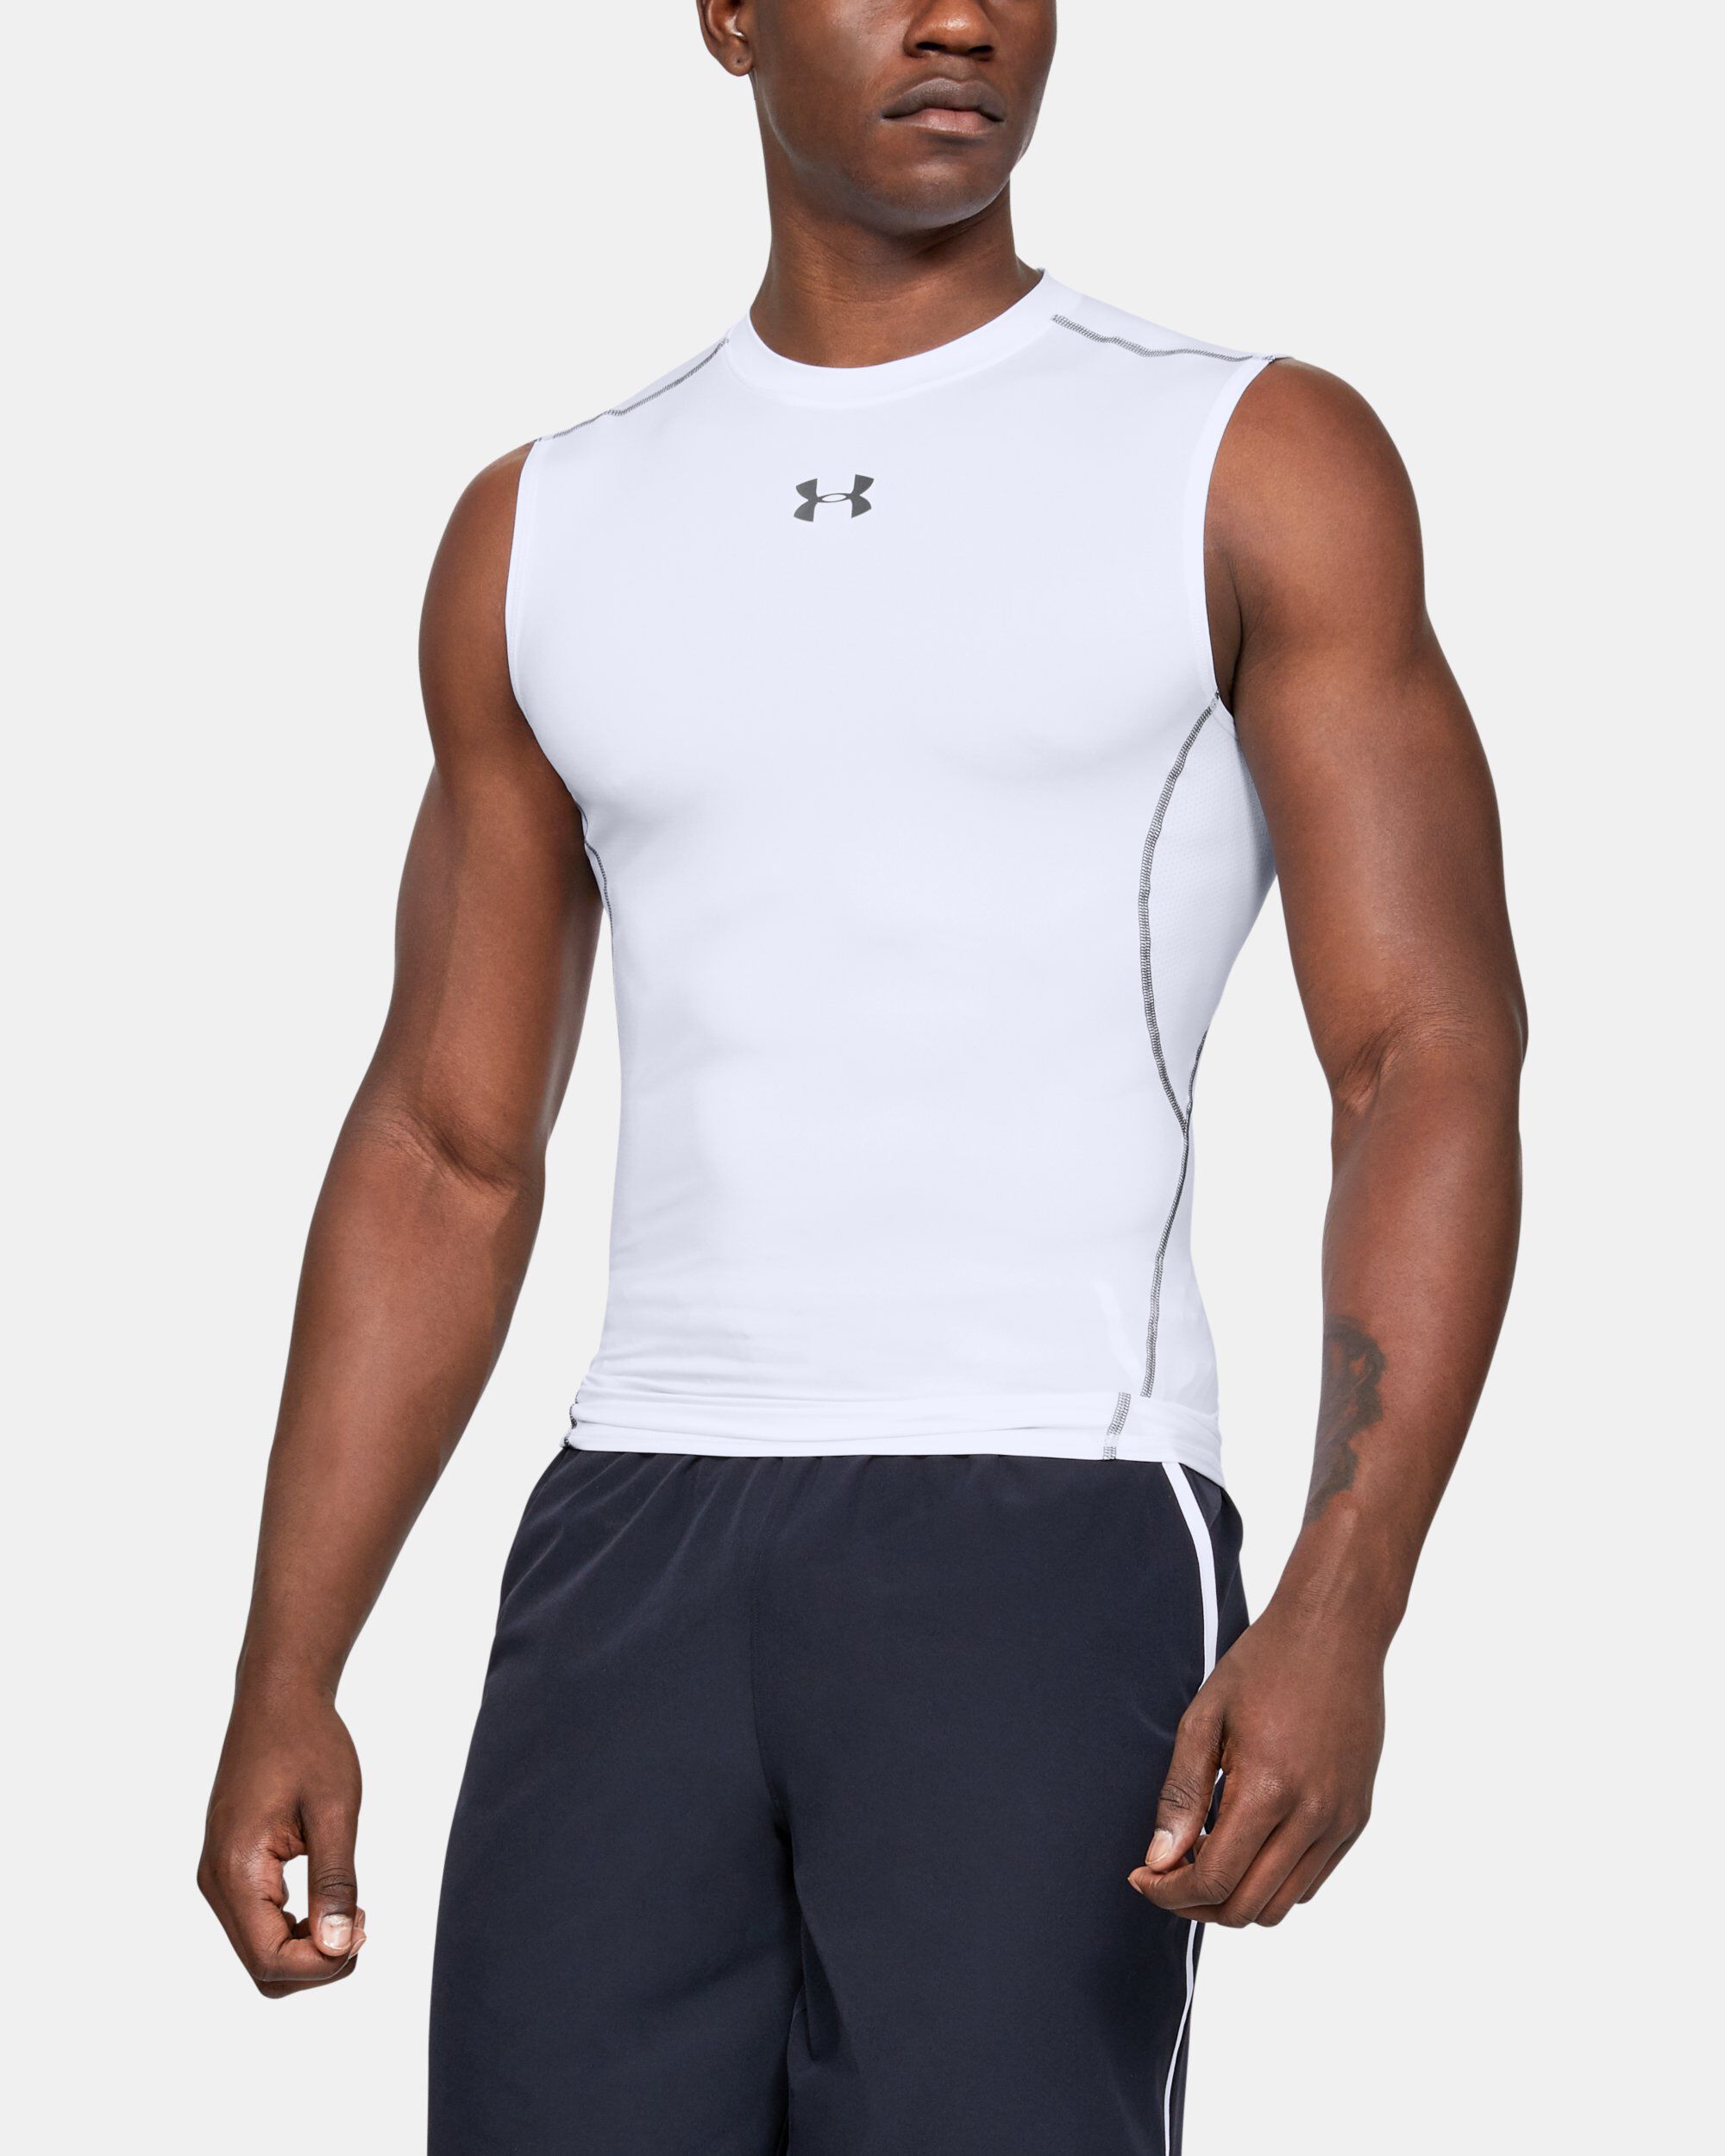 Mens Under Armour Sleeveless Compression Shirt In Black Compression Cut 